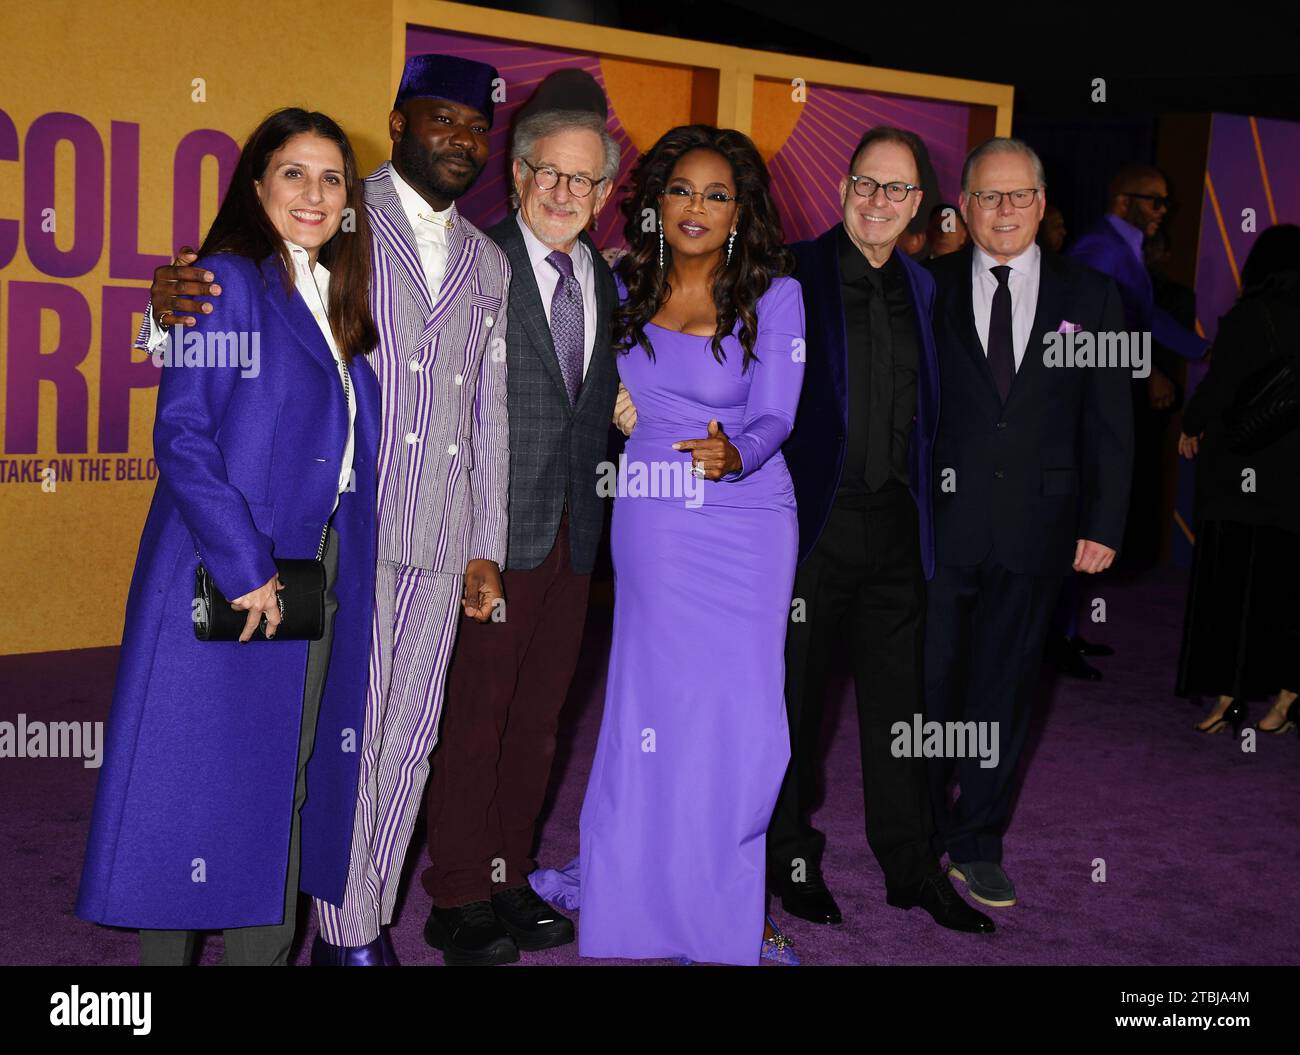 Los Angeles, California, USA. 06th Dec, 2023. (L-R) Pamela Abdy, Blitz Bazawule, Steven Spielberg, Oprah Winfrey, Scott Sanders and David Zaslav attend the World Premiere of Warner Bros.' 'The Color Purple' at Academy Museum of Motion Pictures on December 06, 2023 in Los Angeles, California. Credit: Jeffrey Mayer/Jtm Photos/Media Punch/Alamy Live News Stock Photo